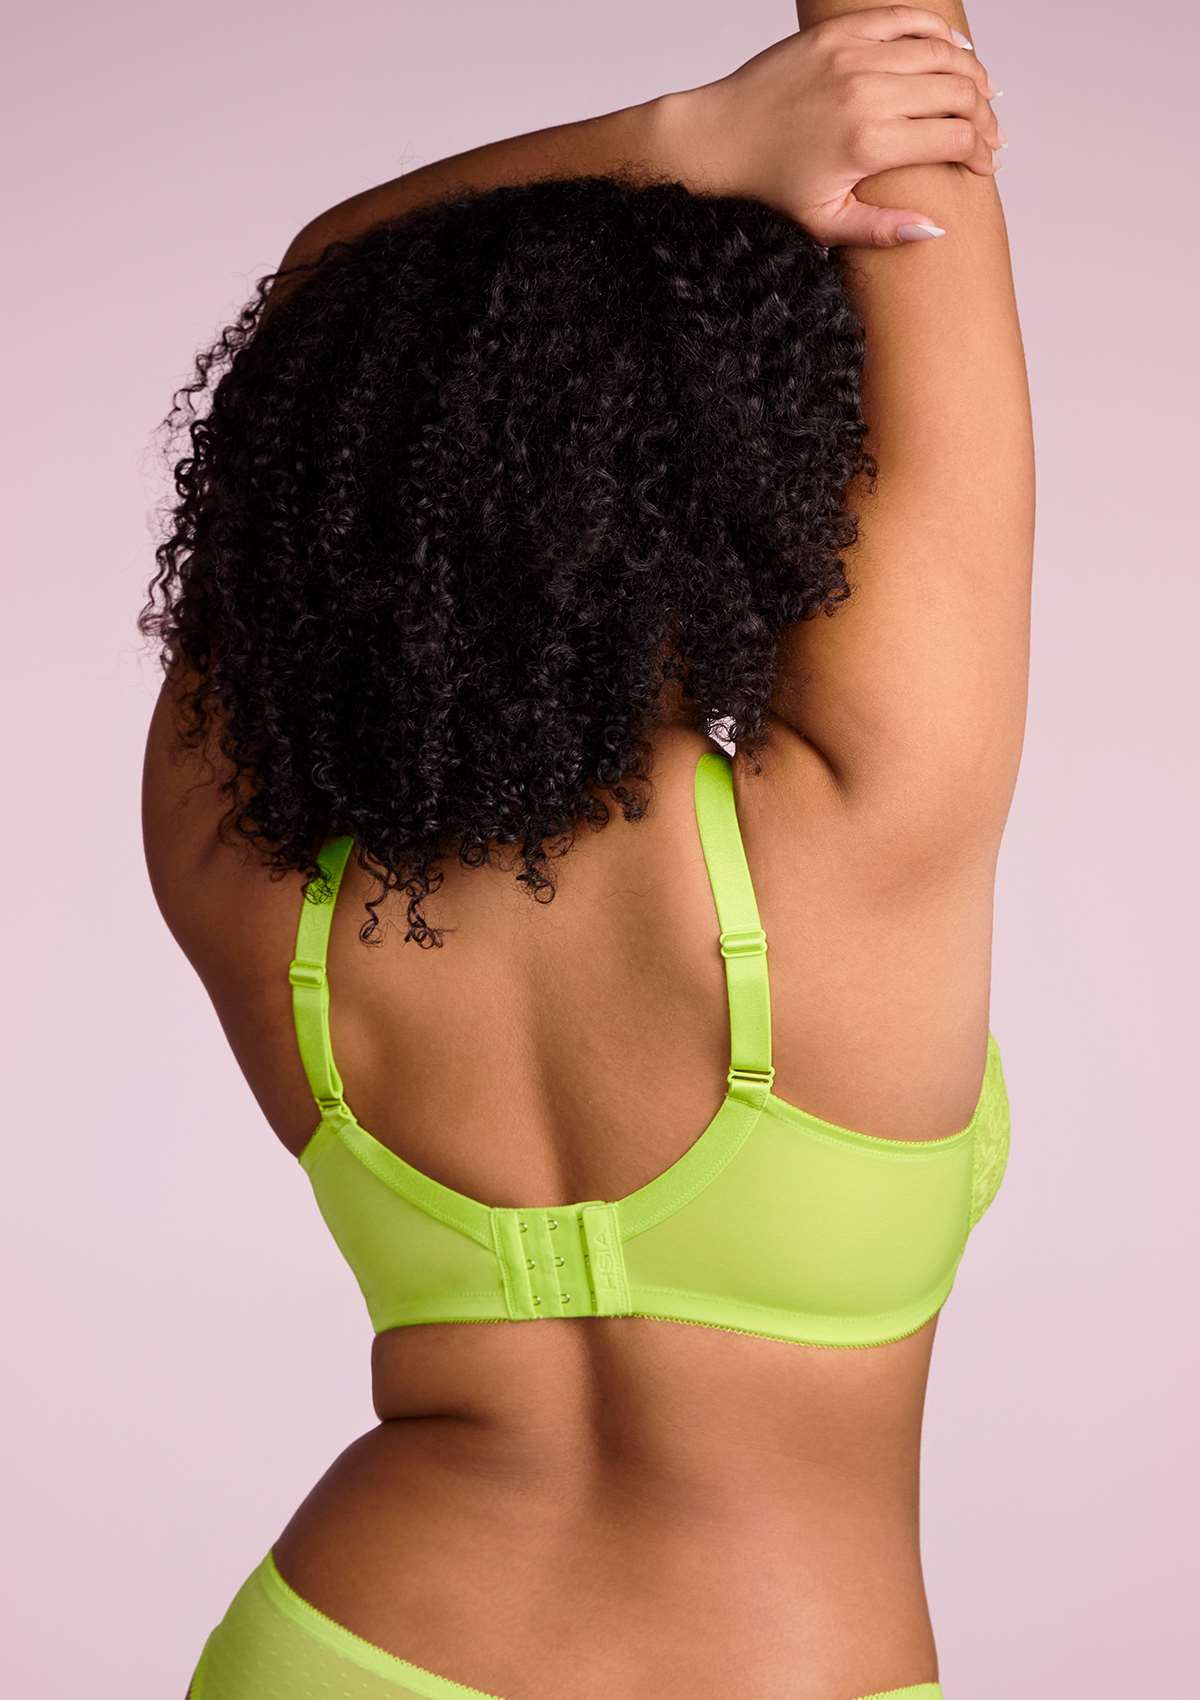 HSIA Enchante Full Cup Minimizing Bra: Supportive Unlined Lace Bra - Lime Green / 34 / D